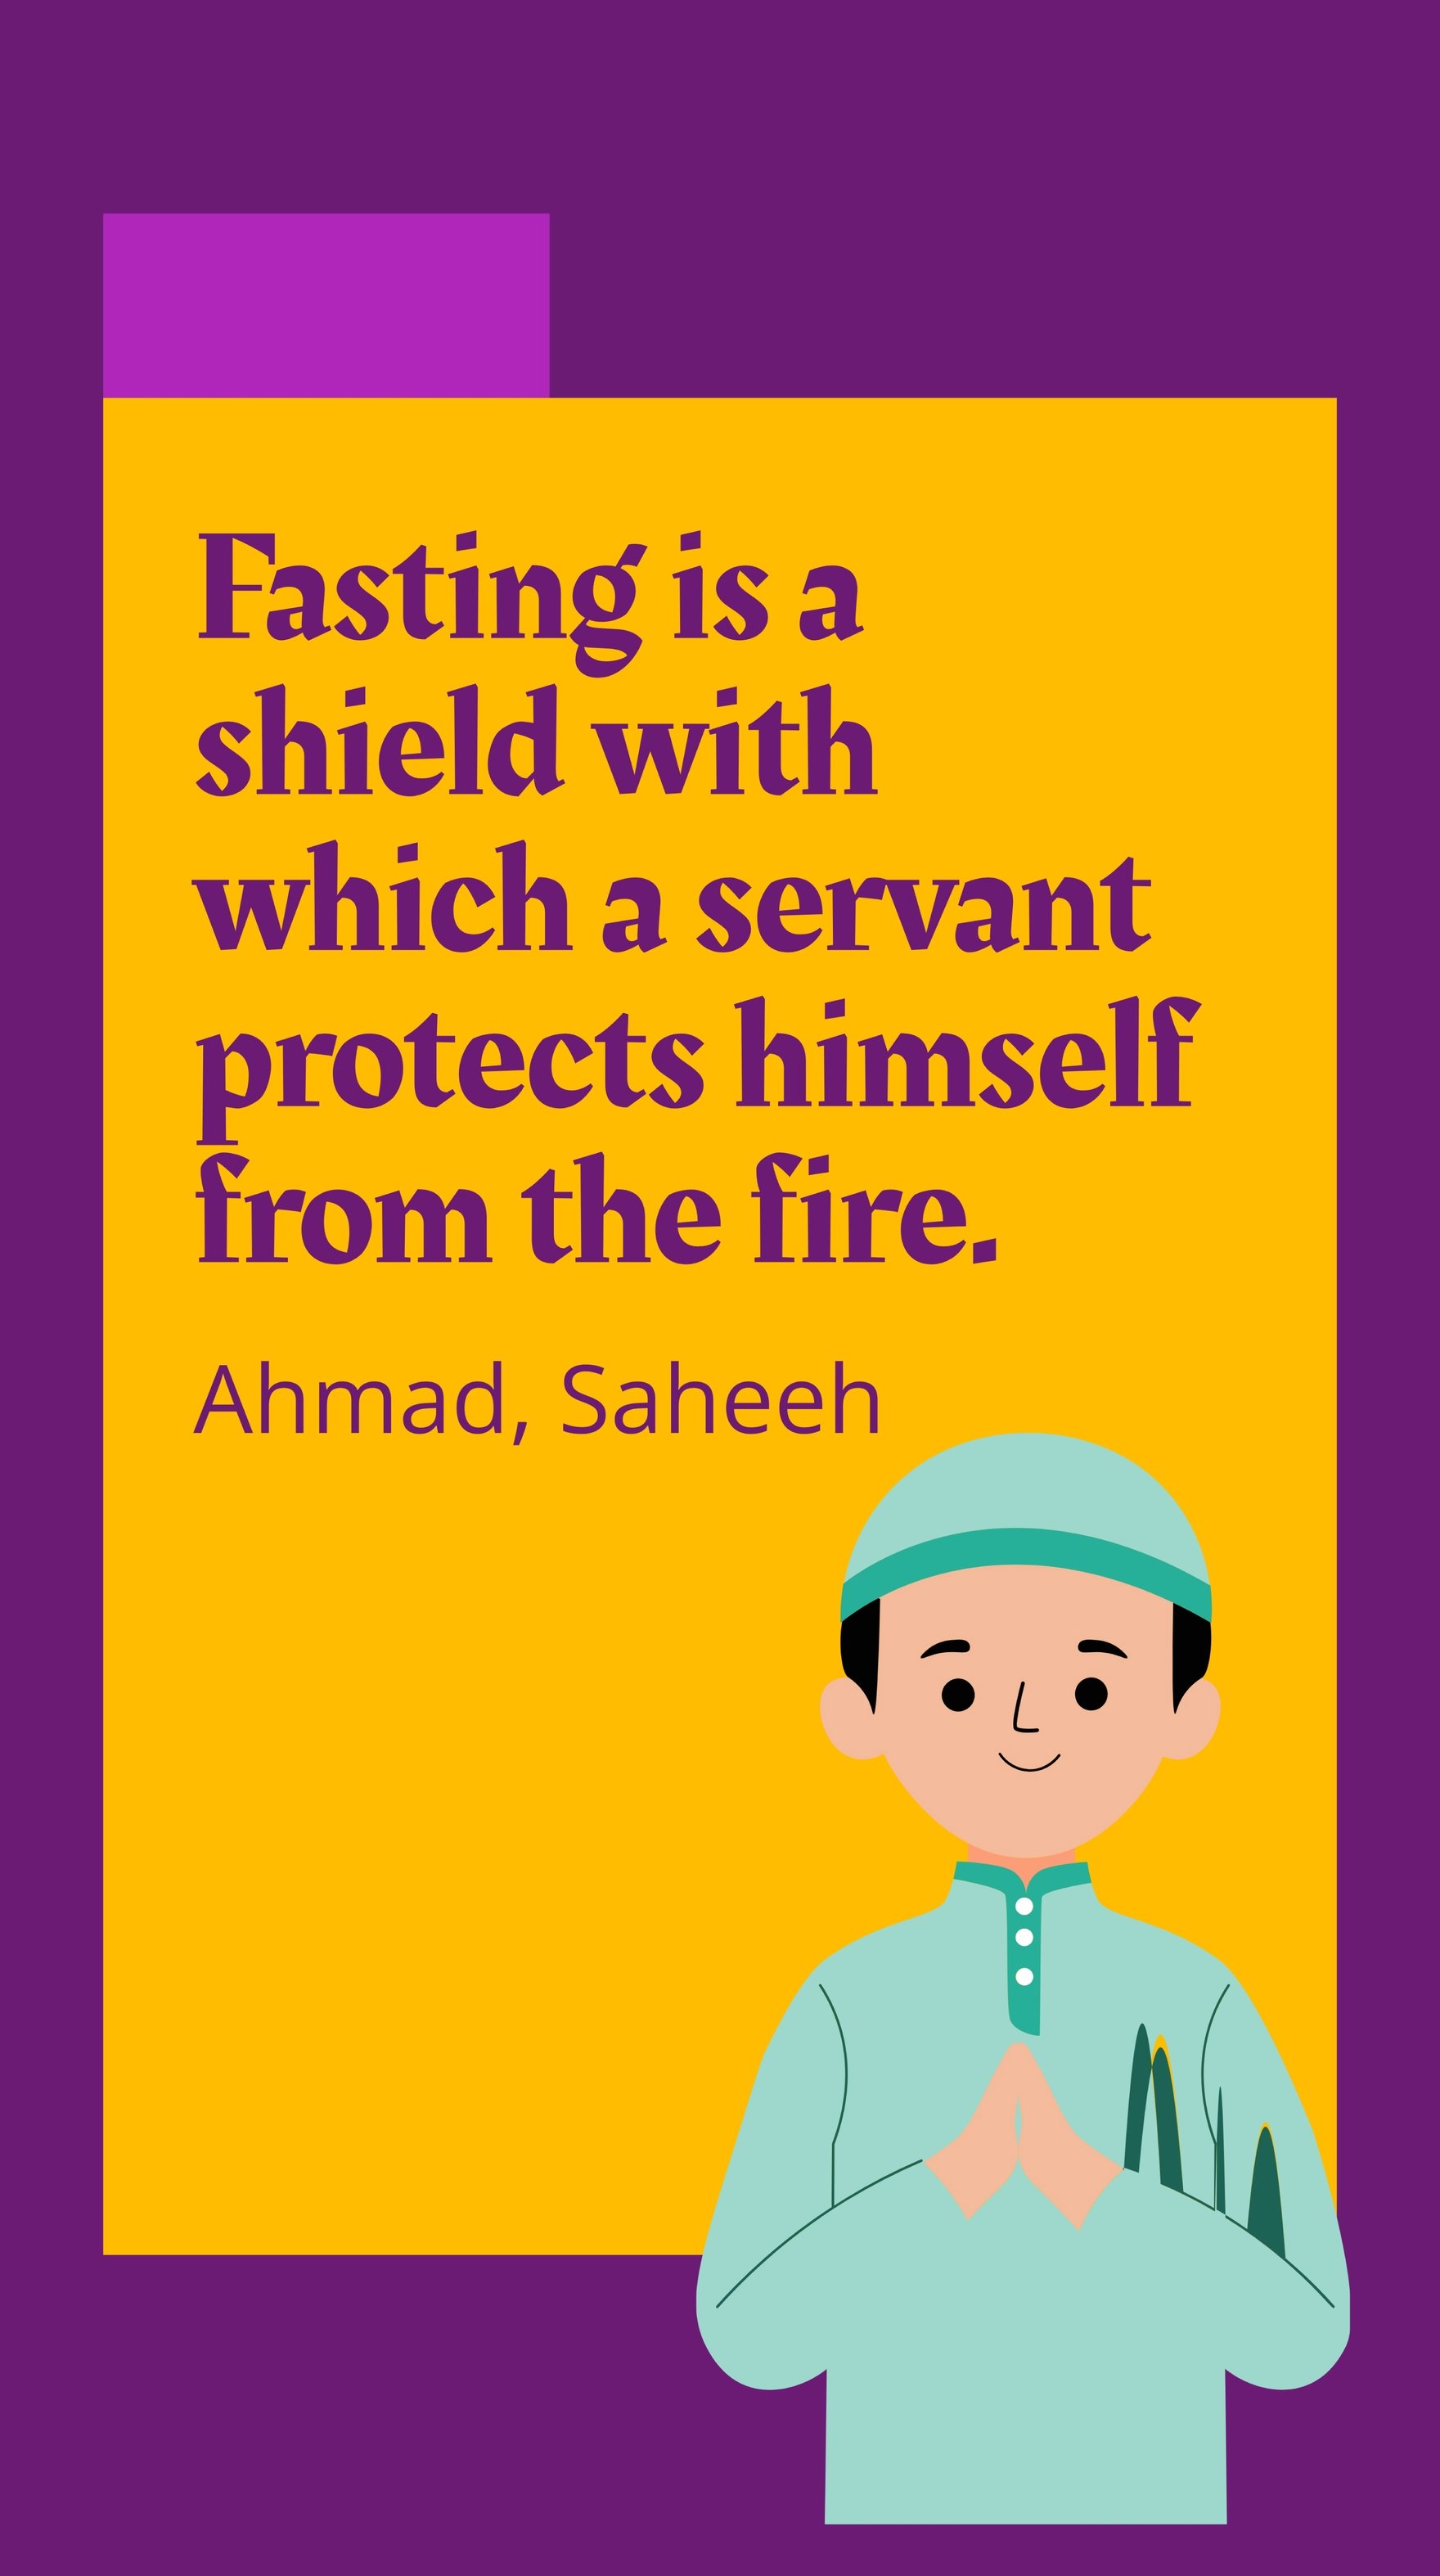 Ahmad, Saheeh - Fasting is a shield with which a servant protects himself from the fire.